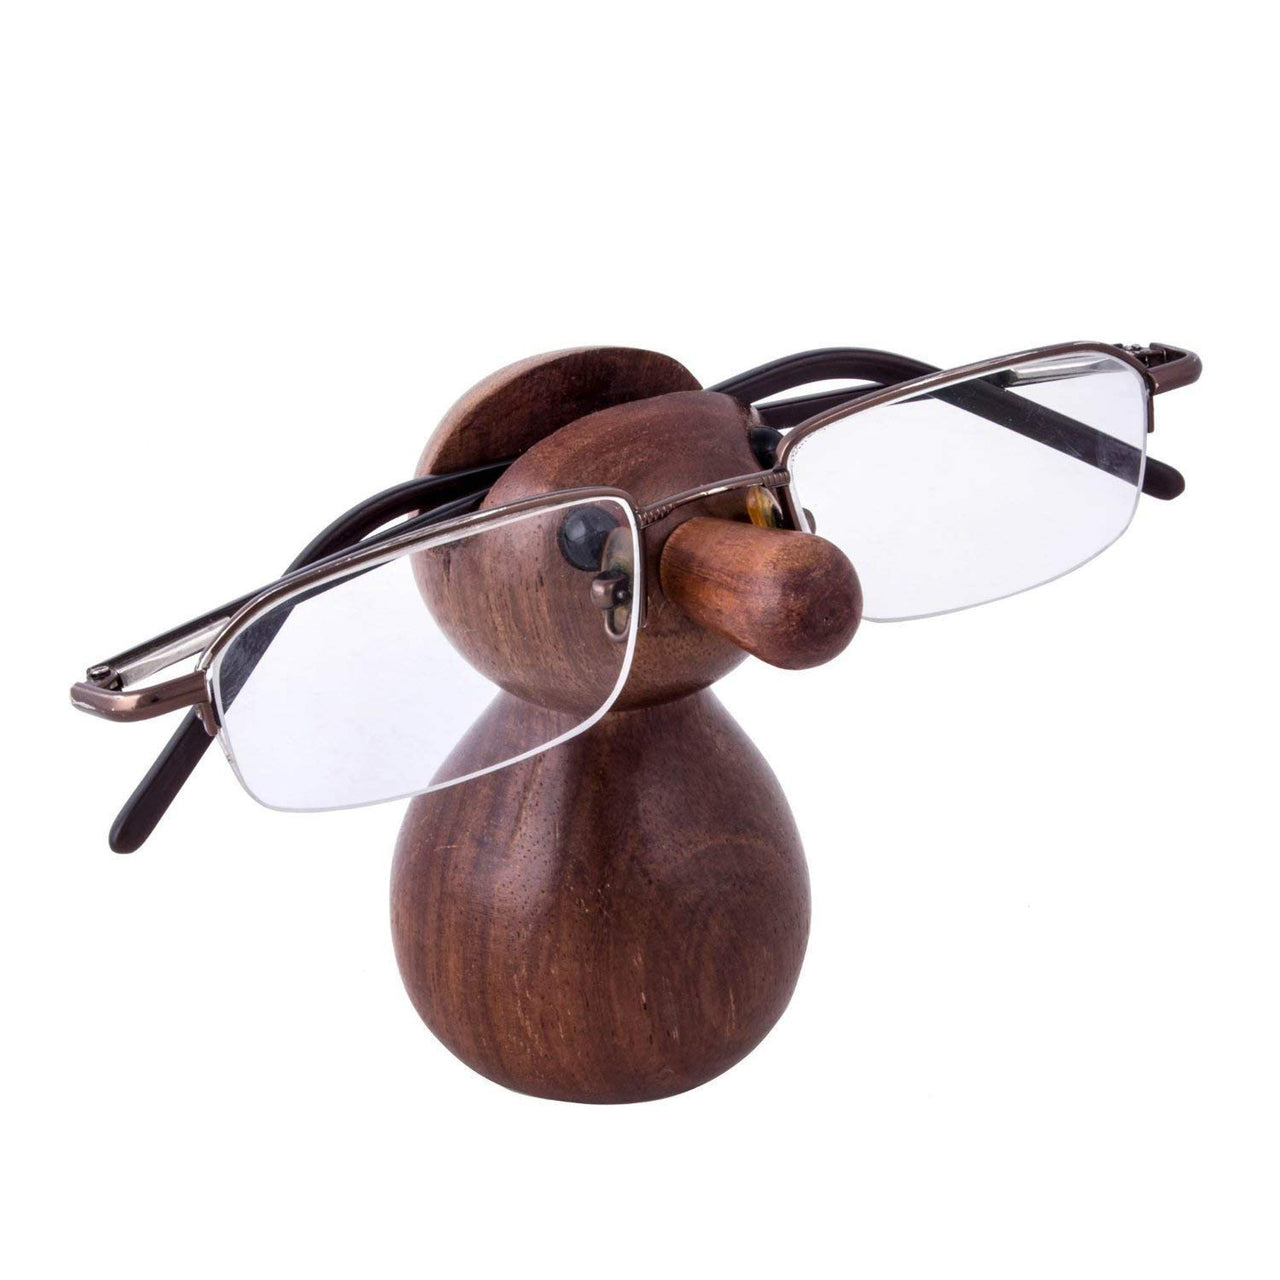 Wooden Handmade Spectacle Holder , Eyeglass Holder Stand Sunglasses Holder Spectacle Display Stand Gift Accessory Dime Store